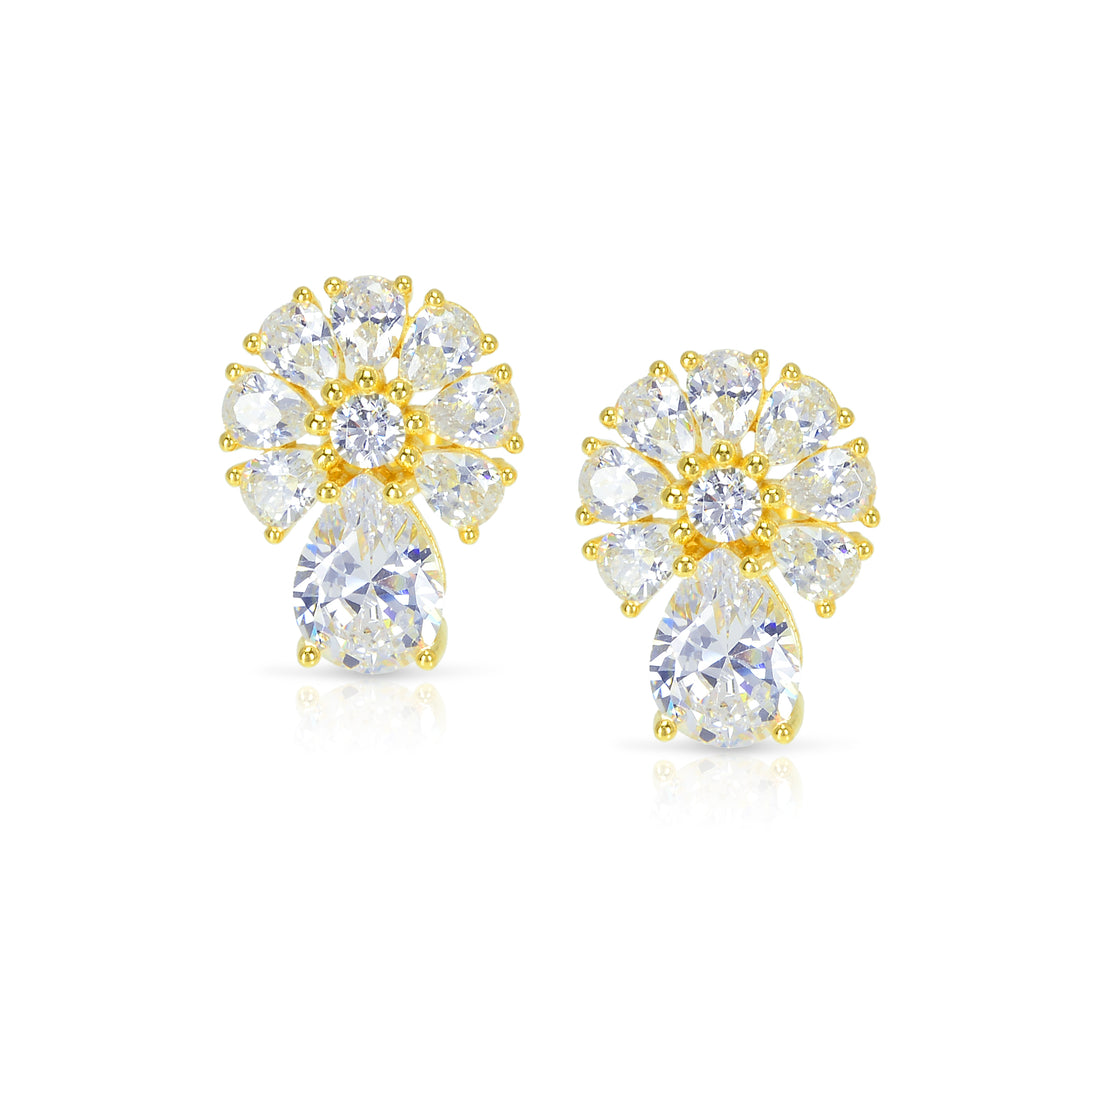 Dazzling silver flower earrings with high quality zircon stone drop